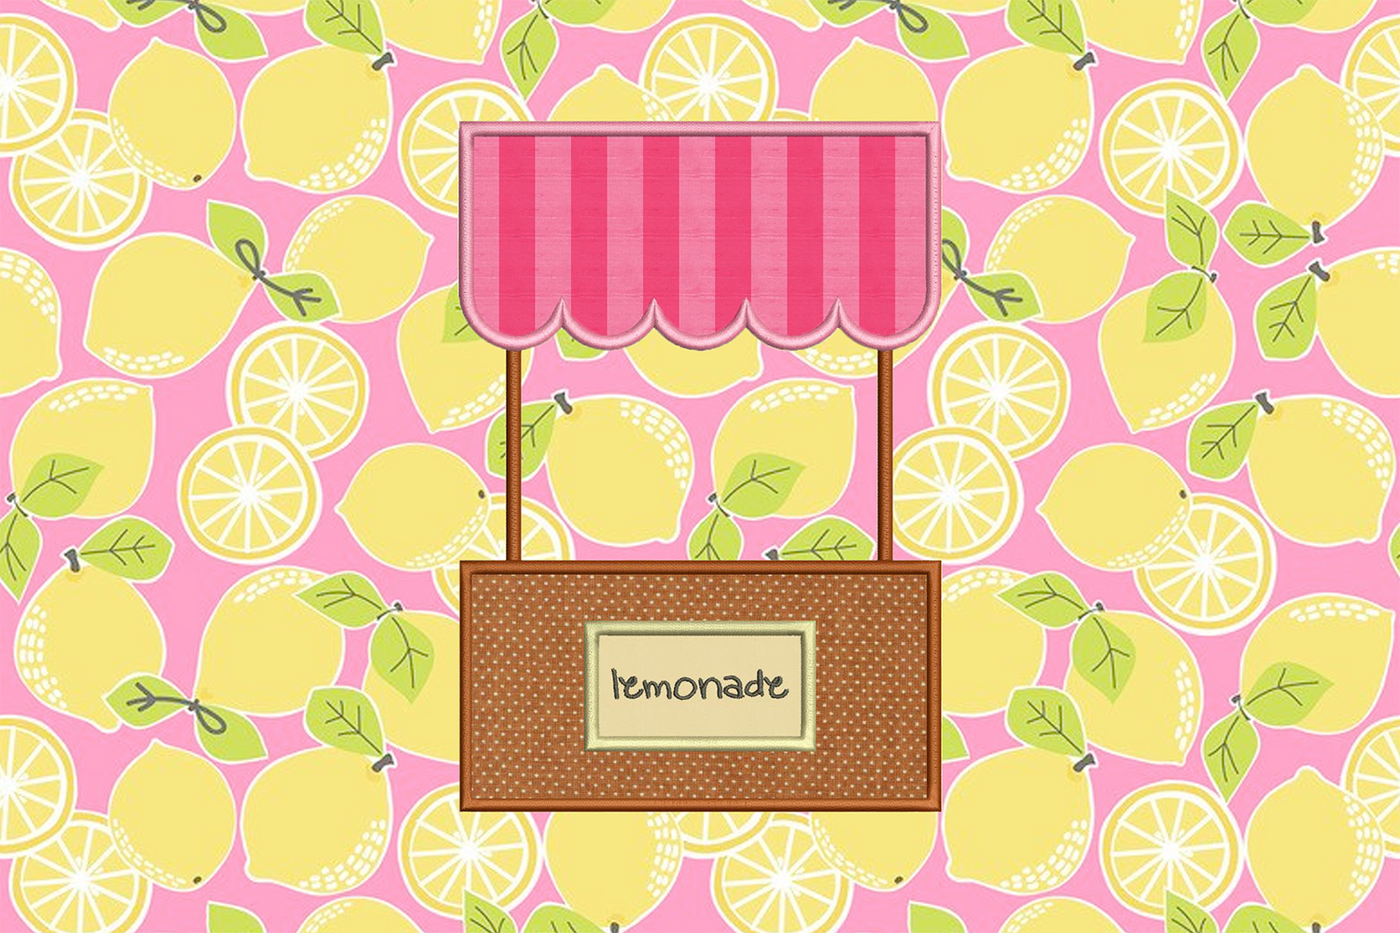 Applique of a lemonade stand with a canopy.